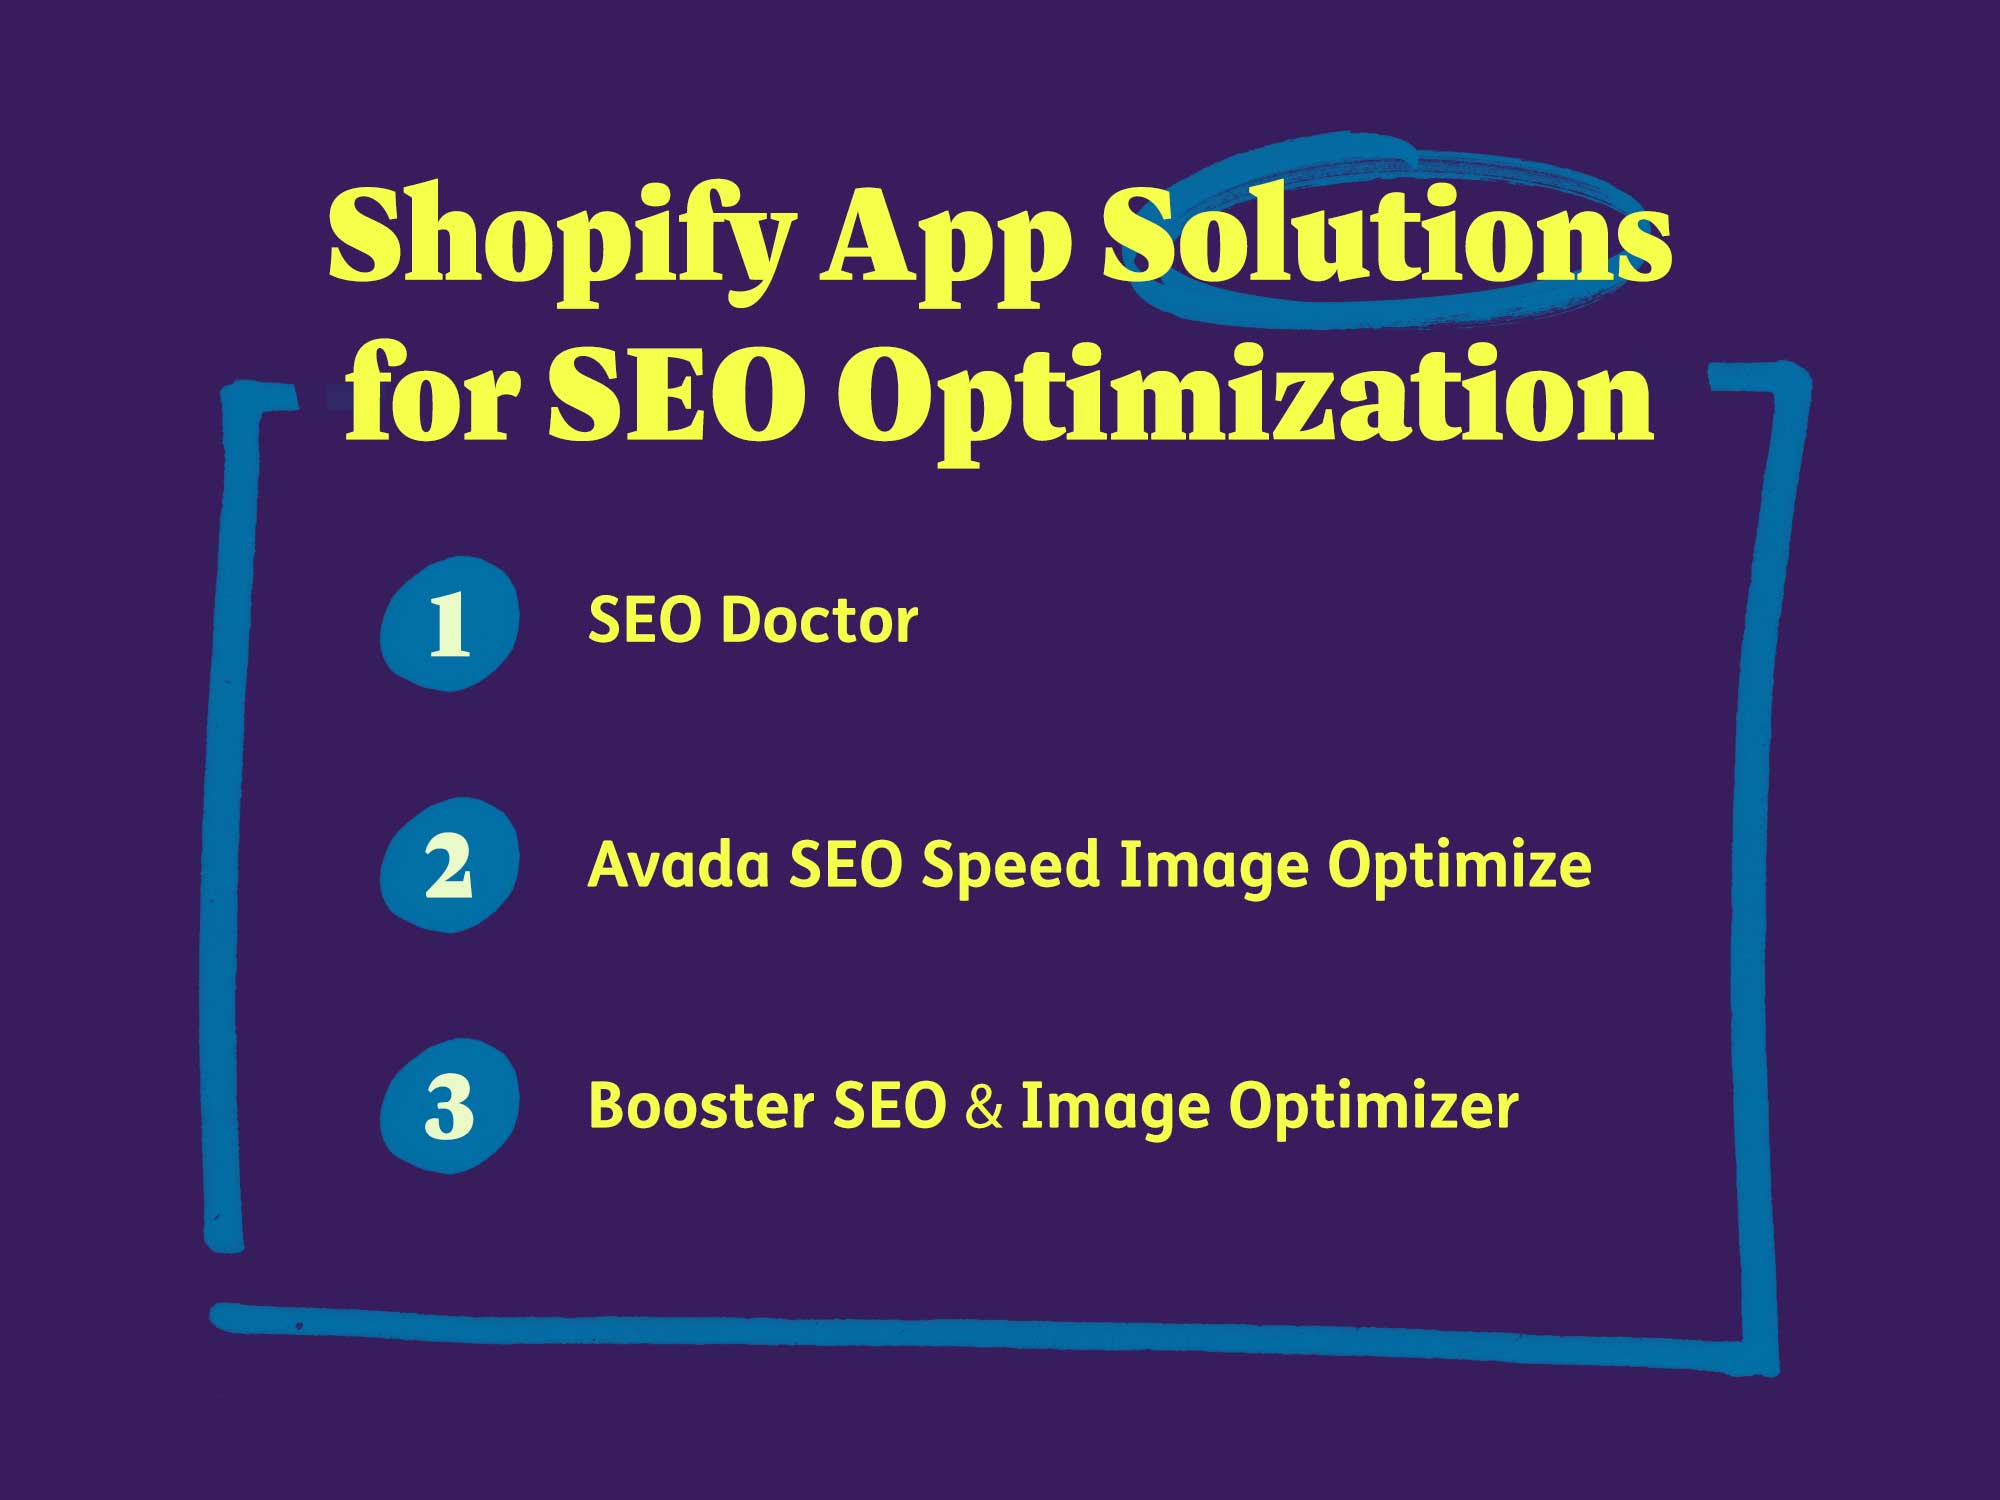 Shopify App Solutions for SEO Optimization: SEO Doctor, Avada SEO Speed Image Optimize, or Booster SEO & Image Optimizer